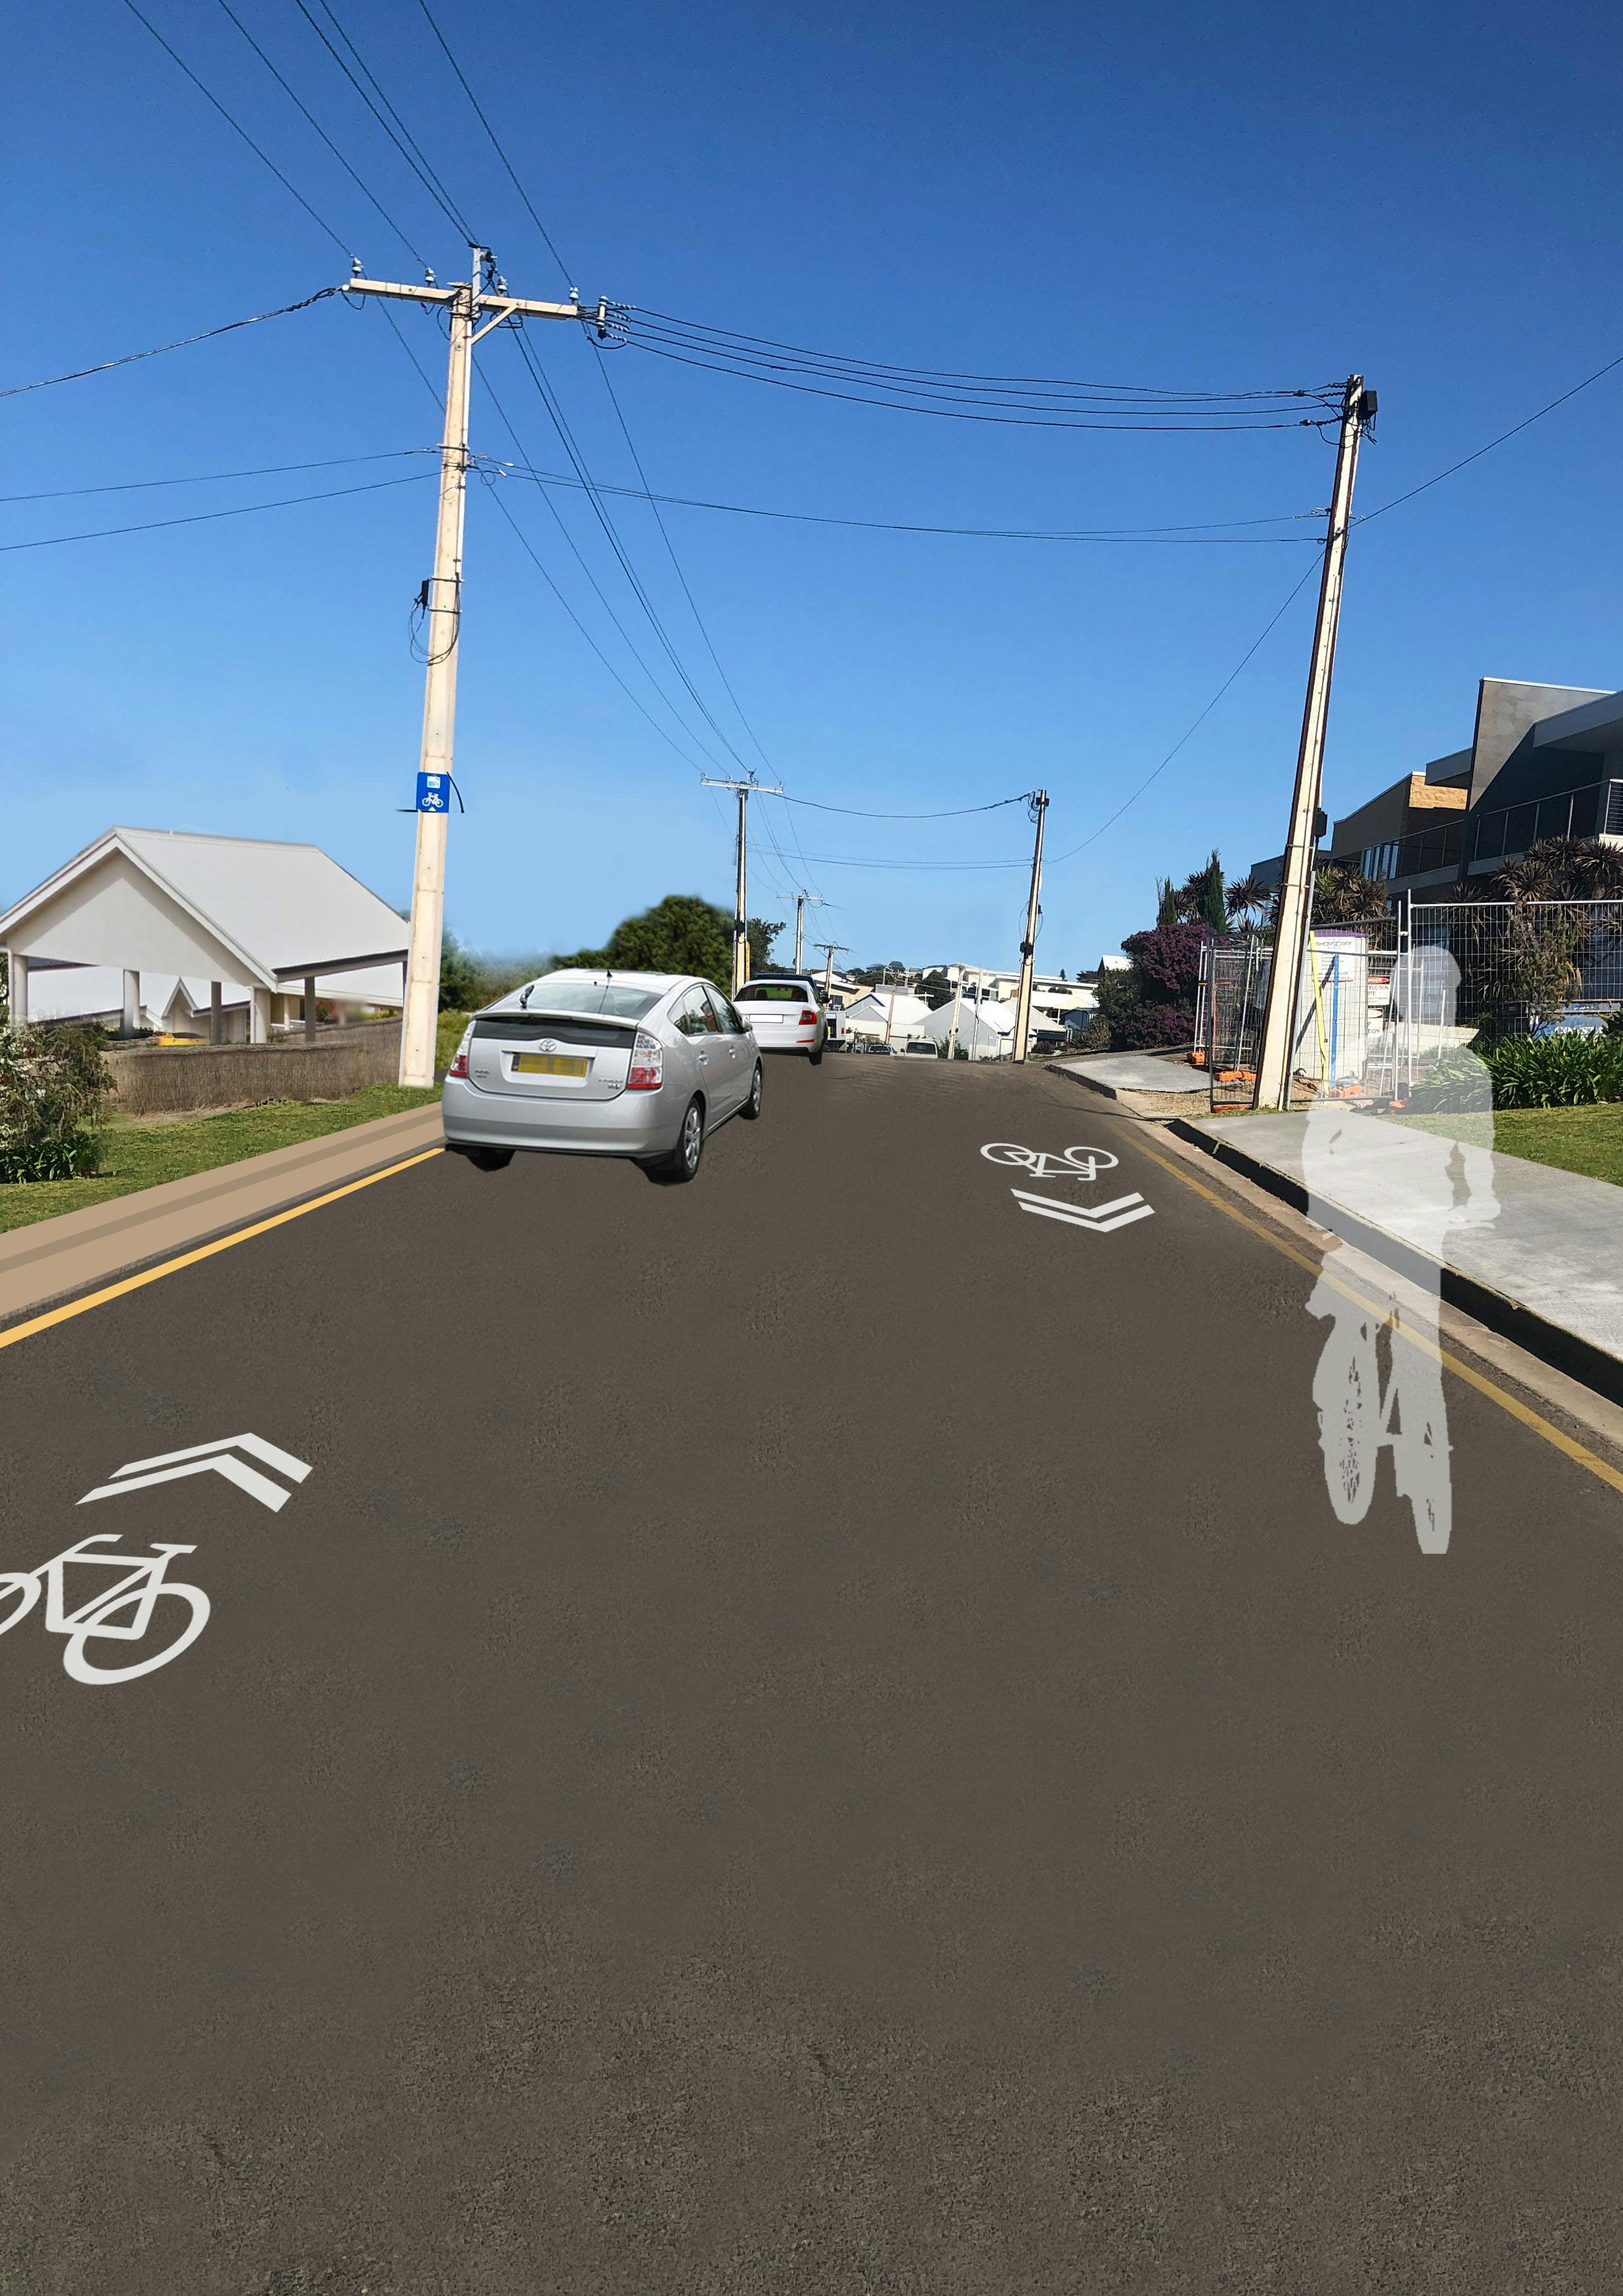 Existing Alignment - Visualisation of Seagull Avenue with footpath and line markings